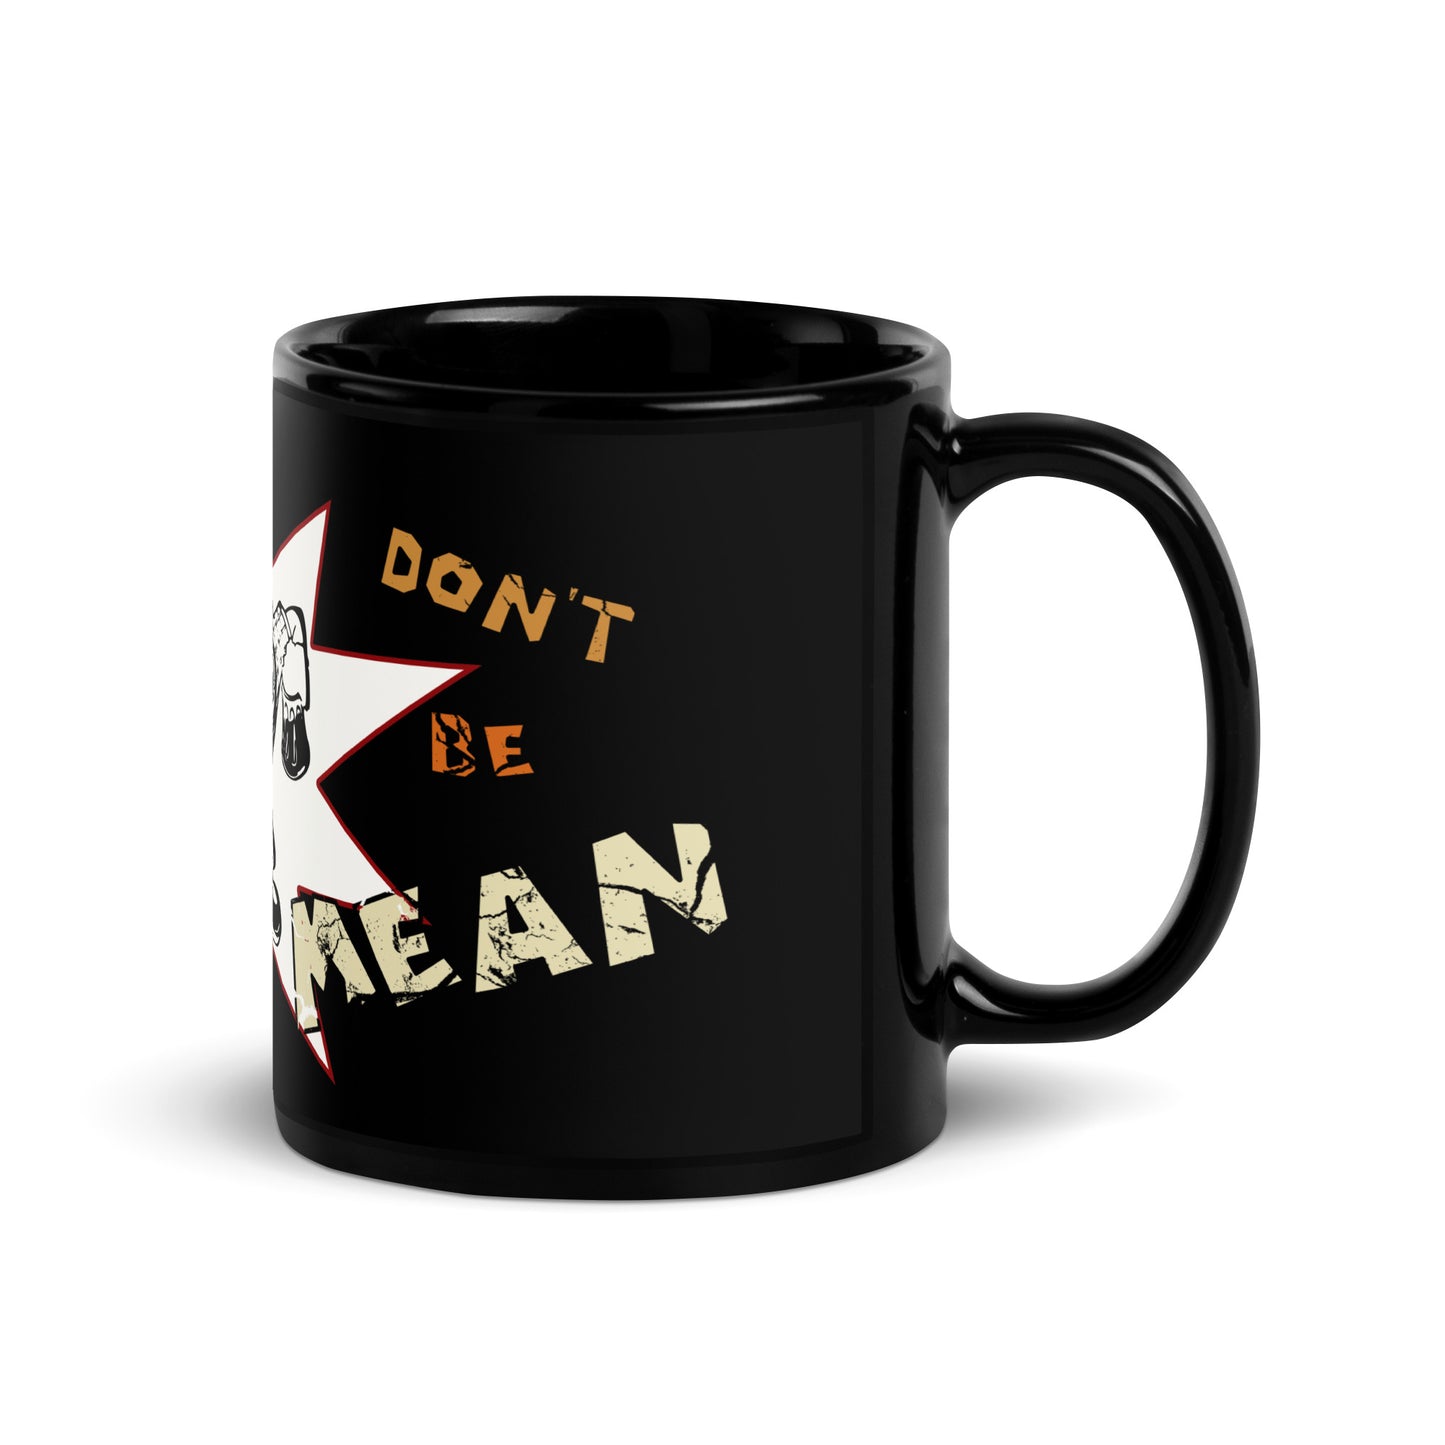 A001 Mug - Black Glossy Ceramic Mug Featuring Mean Guy Graphic with text “Abortion is Mean. Don’t be Mean.”